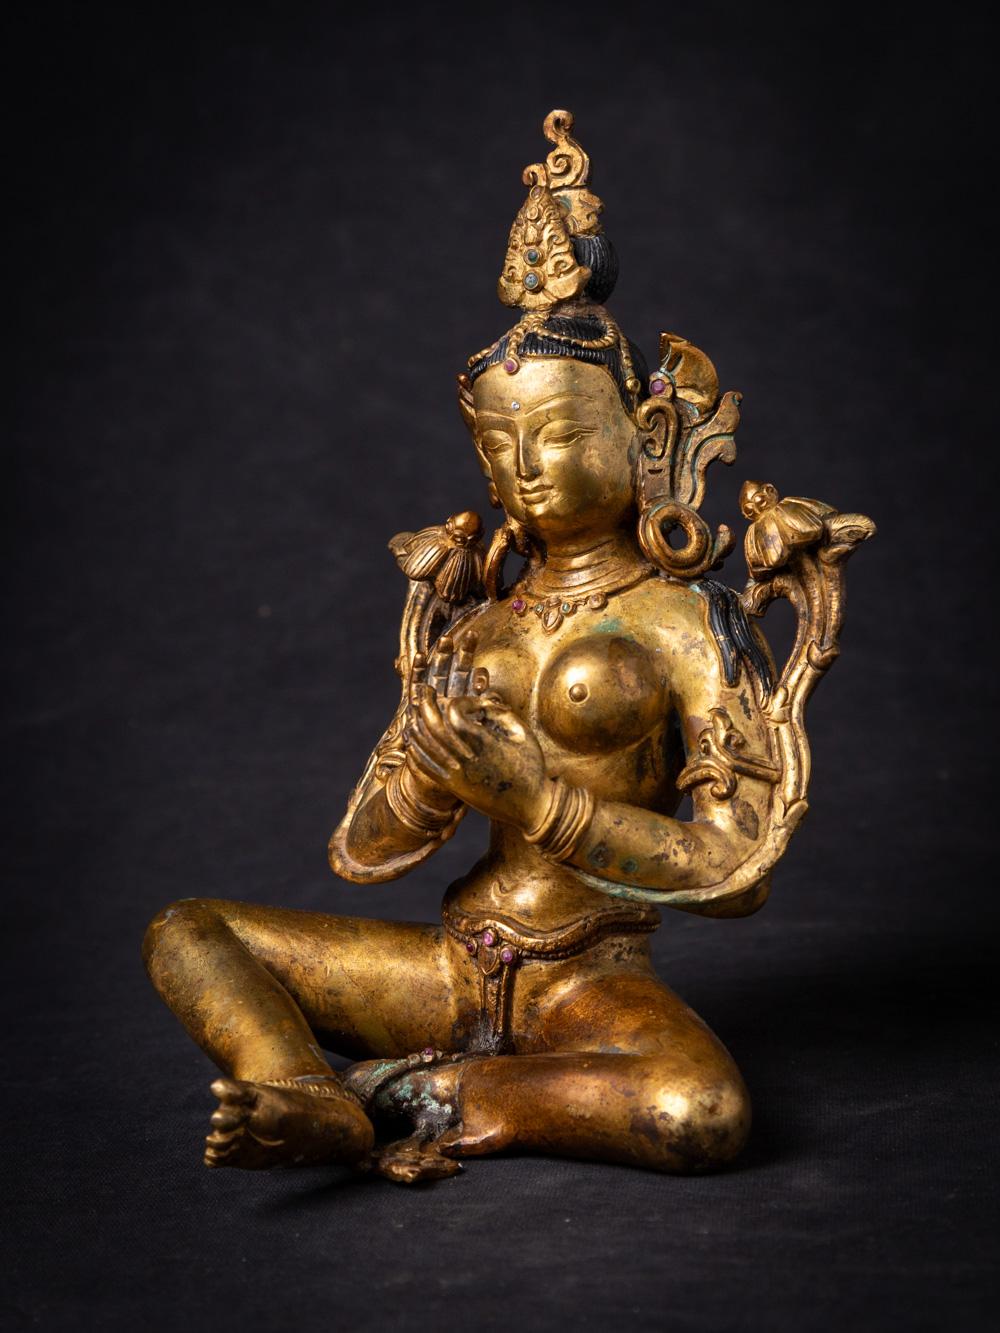 This old bronze Nepali Green Tara statue is a magnificent representation of the revered deity. Crafted from bronze and standing at a height of 20.4 cm, with dimensions of 14 cm in width and 11.9 cm in depth, this statue exudes elegance and spiritual